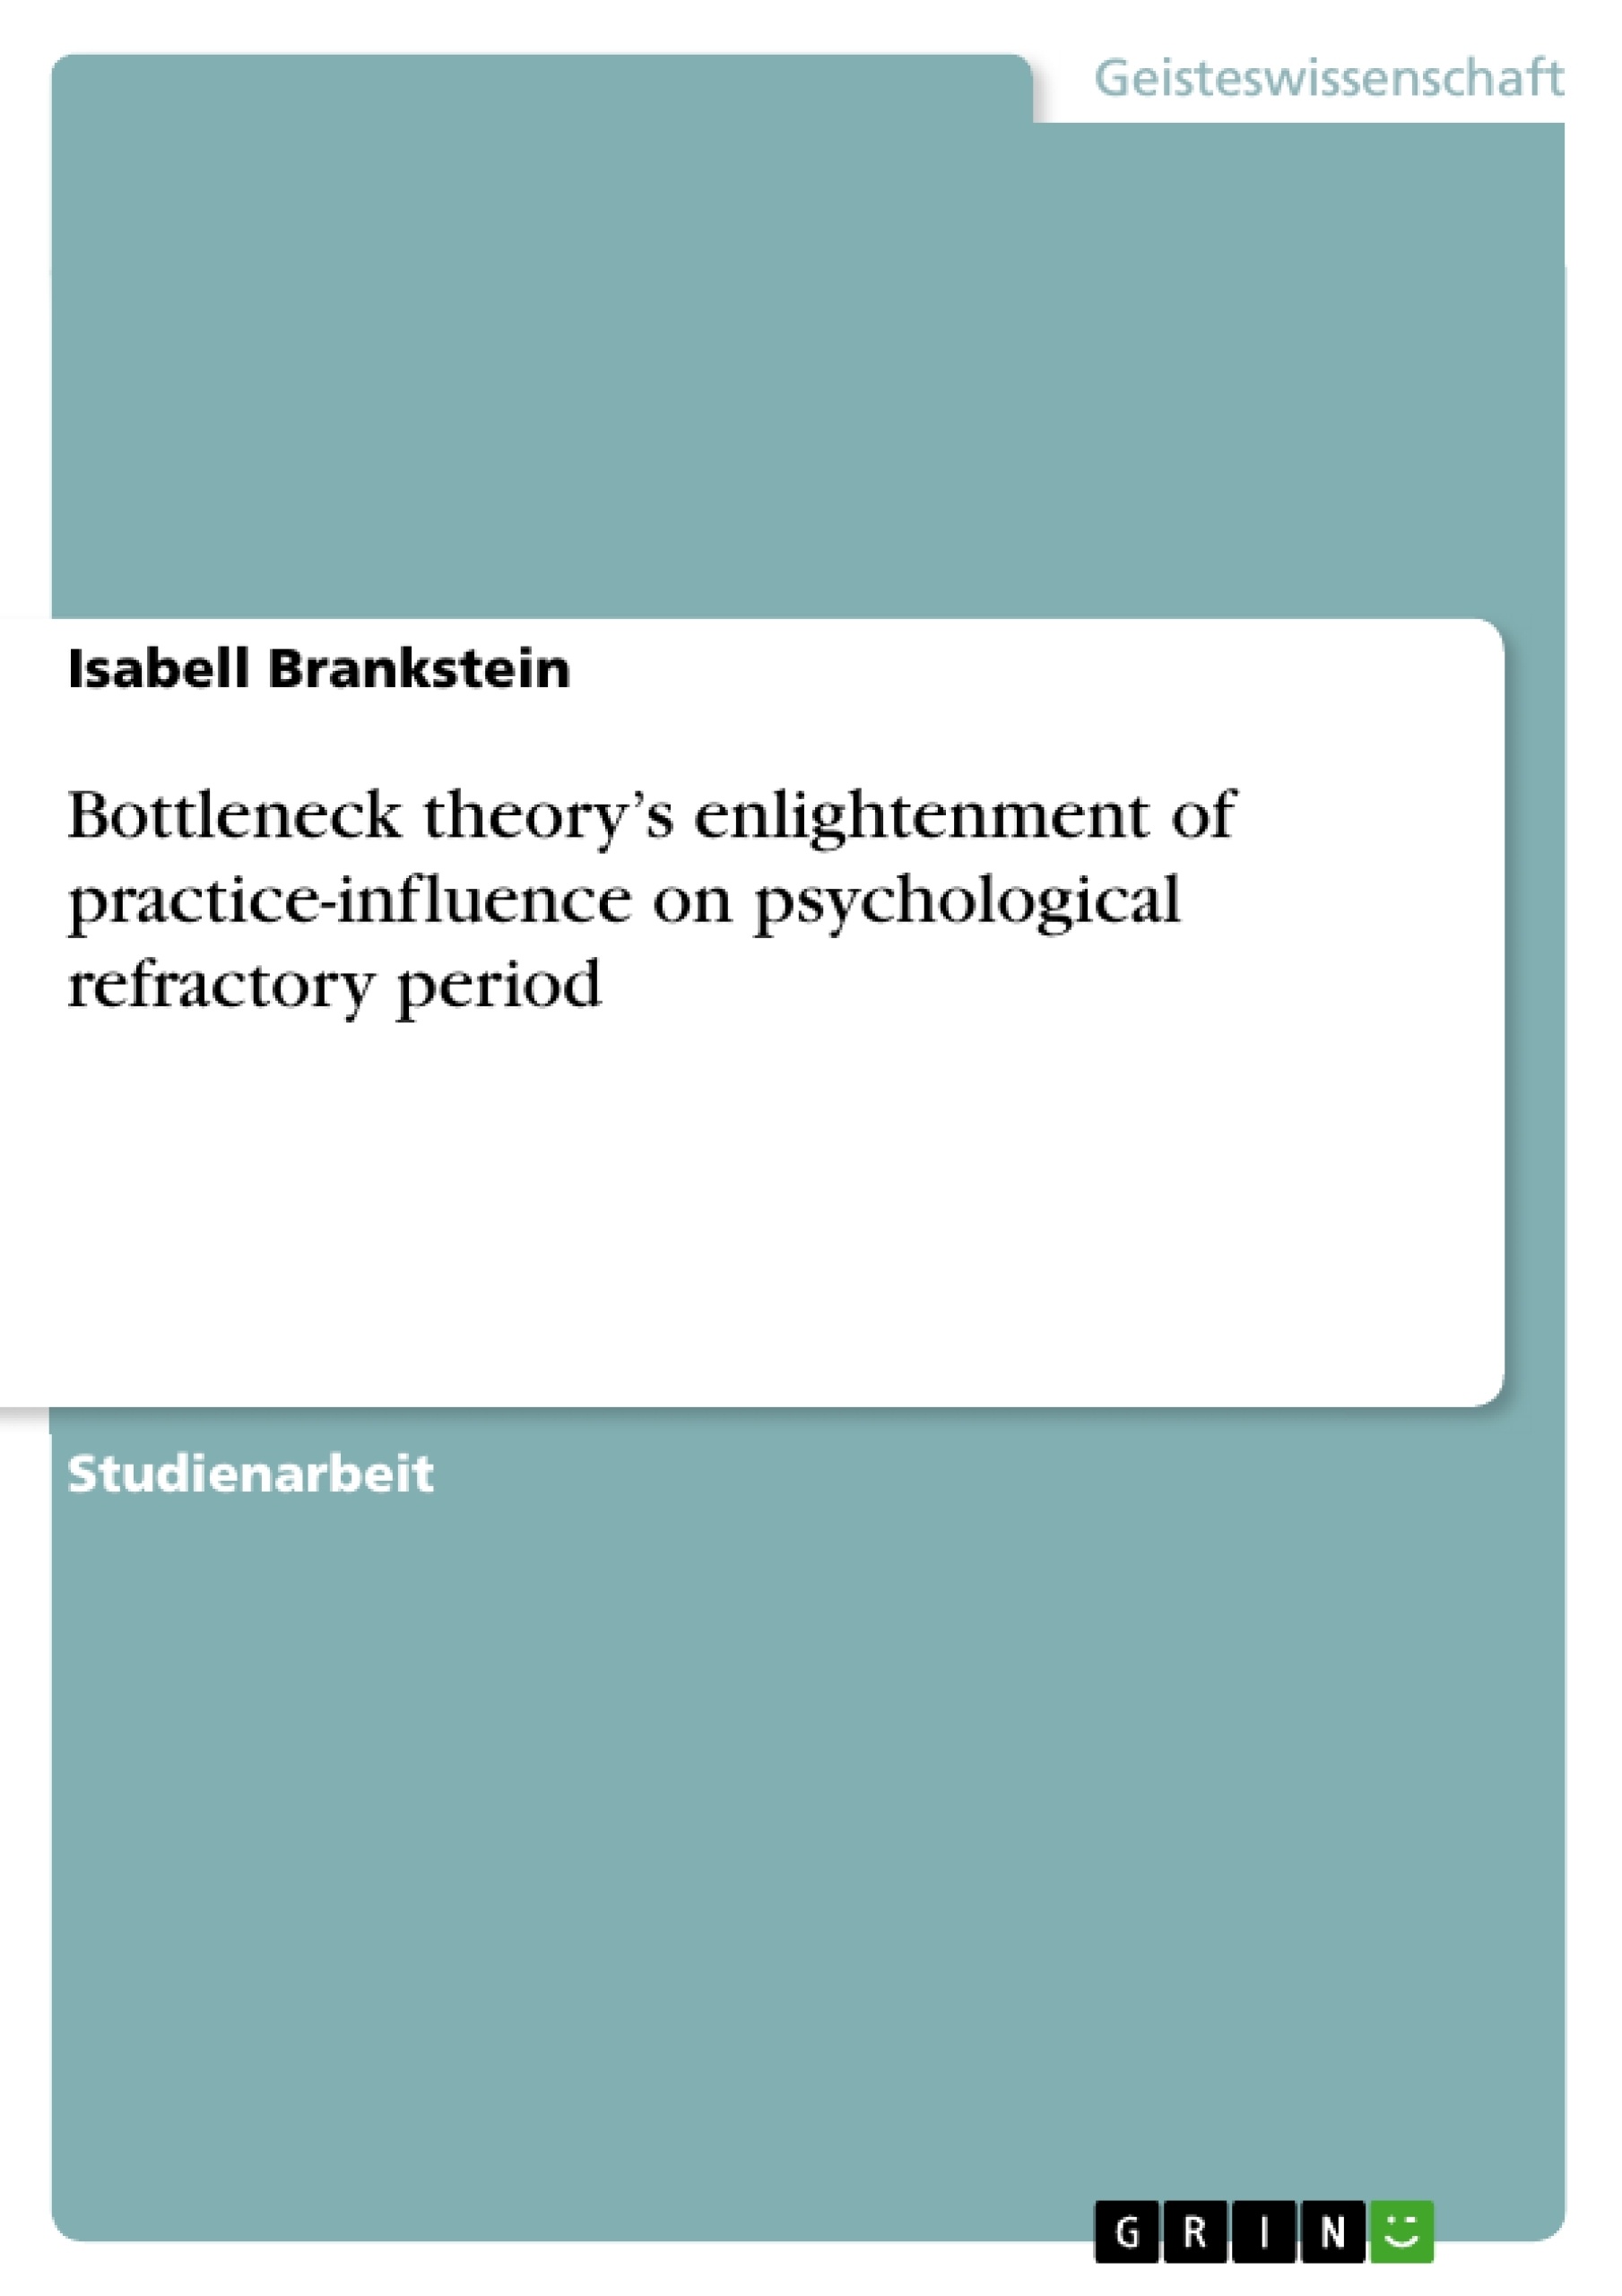 Titel: Bottleneck theory’s enlightenment of practice-influence on psychological refractory period